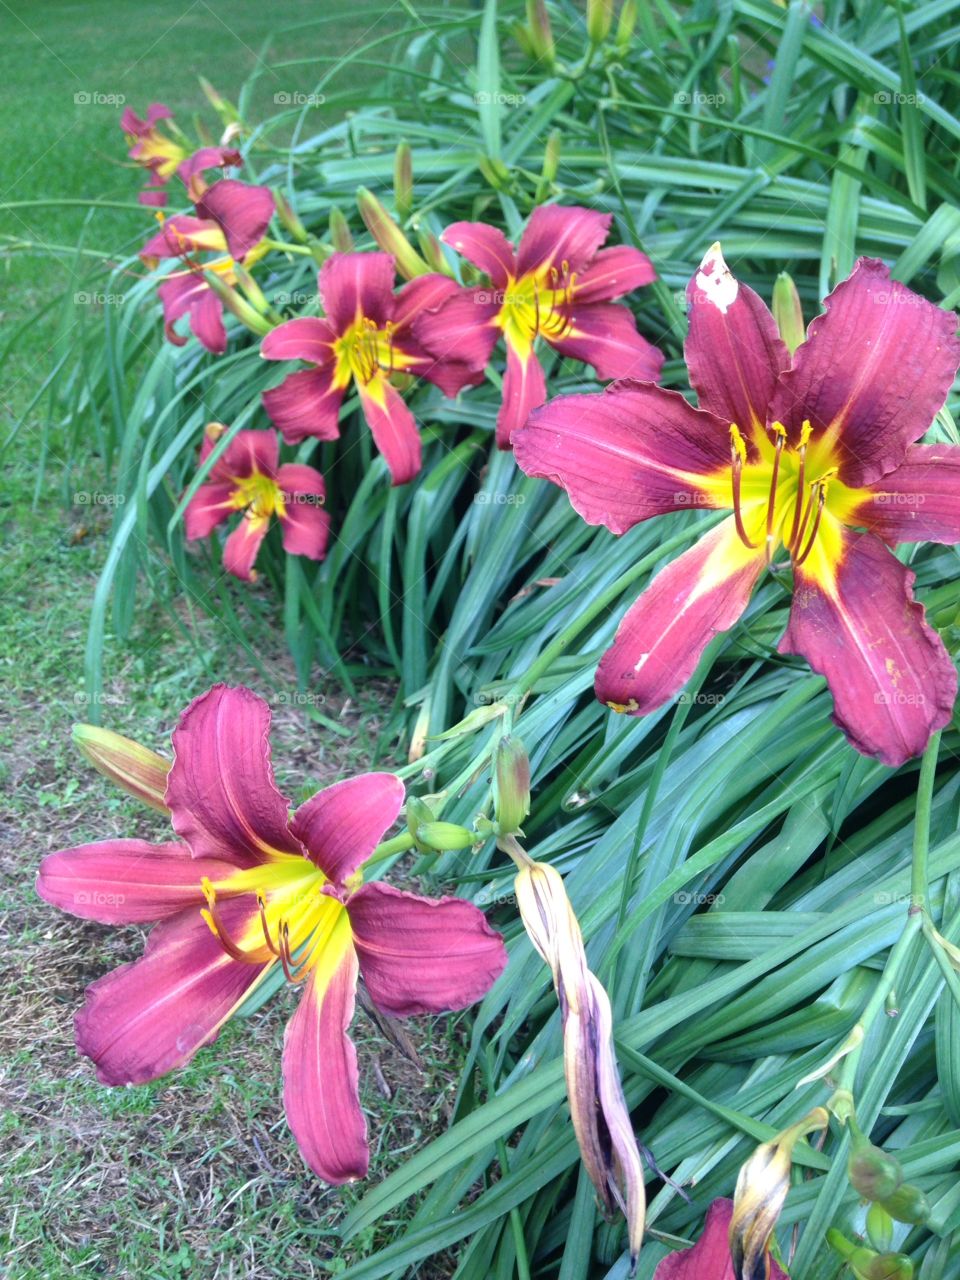 Day lily 